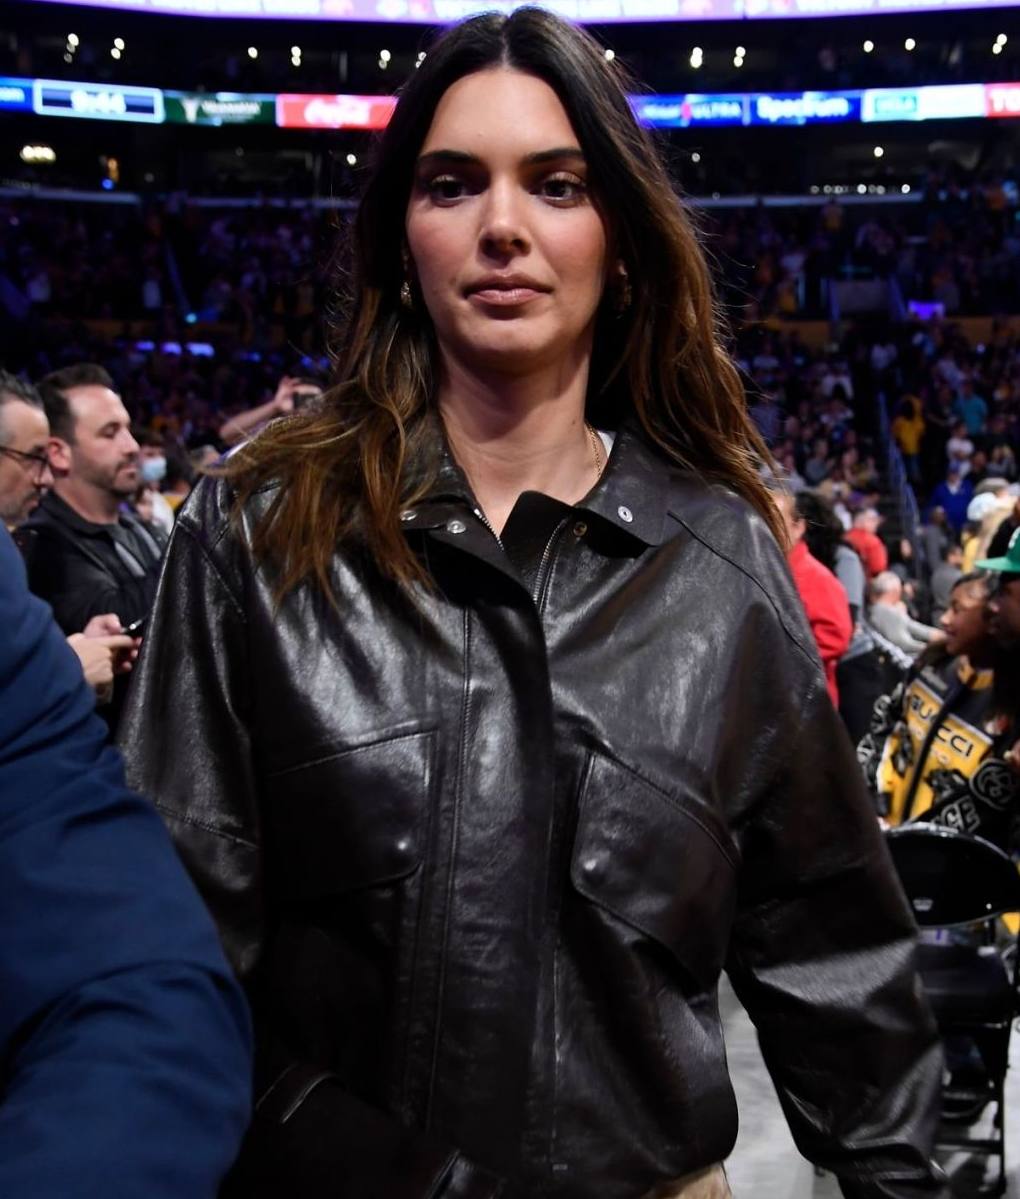 kendall-jenner-nba-playoffs-western-conference-semi-finals-in-los-angeles